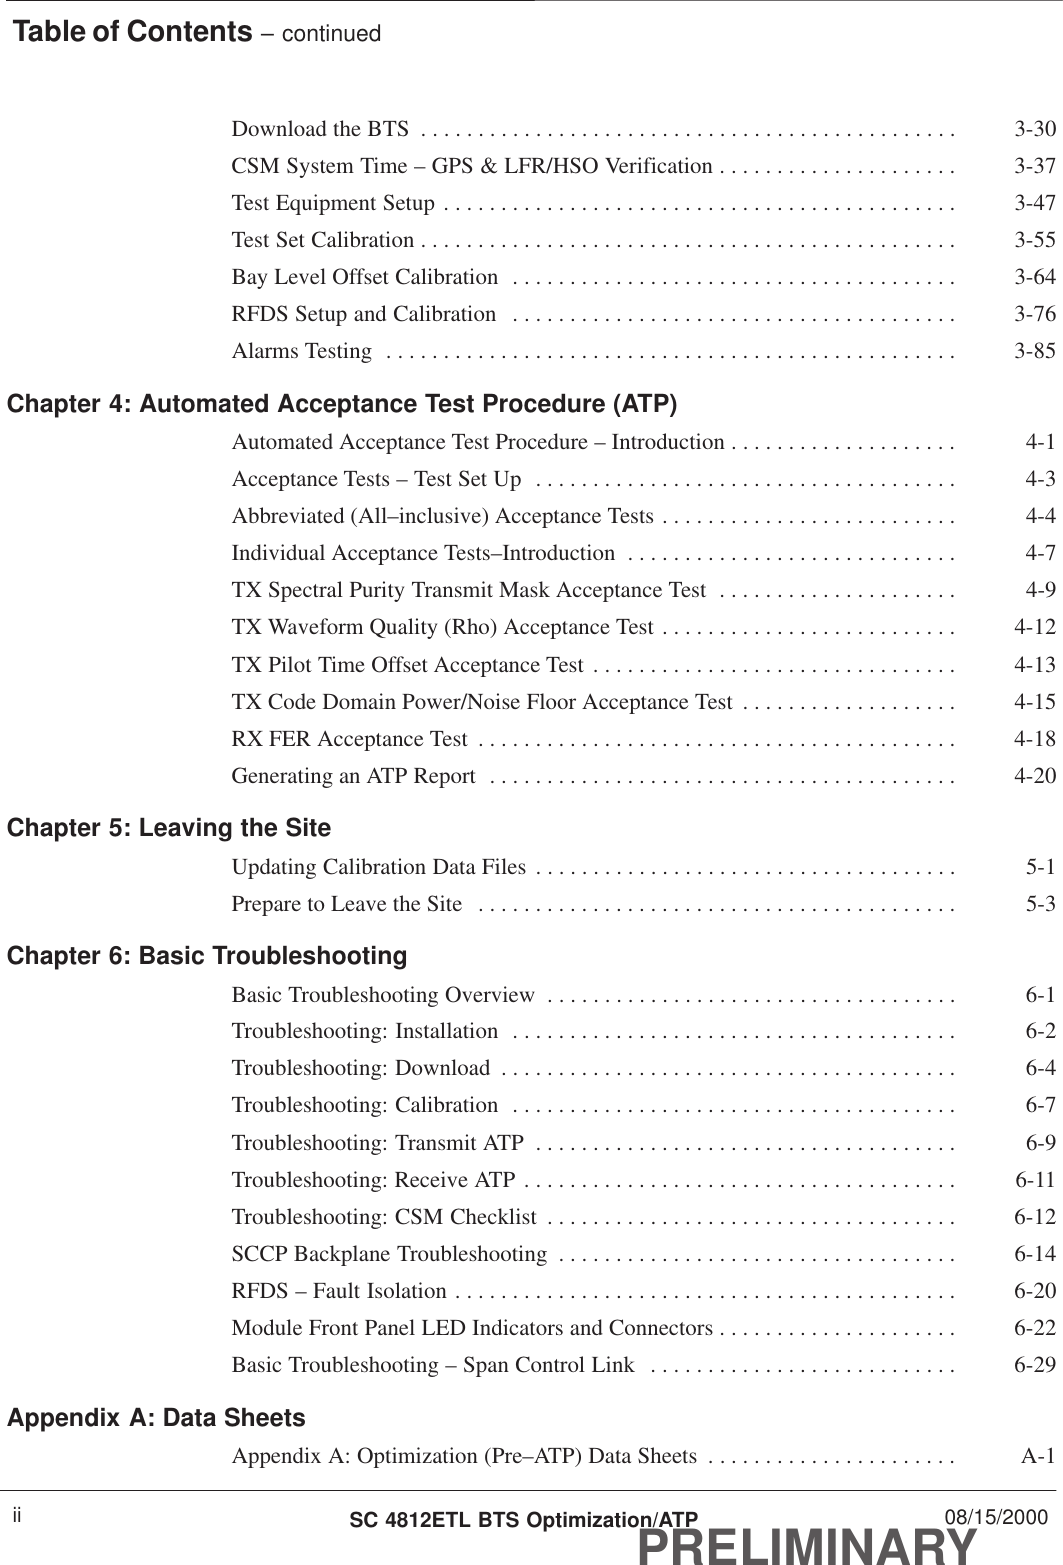 Table of Contents – continuedPRELIMINARYSC 4812ETL BTS Optimization/ATP 08/15/2000iiDownload the BTS 3-30. . . . . . . . . . . . . . . . . . . . . . . . . . . . . . . . . . . . . . . . . . . . . . . CSM System Time – GPS &amp; LFR/HSO Verification 3-37. . . . . . . . . . . . . . . . . . . . . Test Equipment Setup 3-47. . . . . . . . . . . . . . . . . . . . . . . . . . . . . . . . . . . . . . . . . . . . . Test Set Calibration 3-55. . . . . . . . . . . . . . . . . . . . . . . . . . . . . . . . . . . . . . . . . . . . . . . Bay Level Offset Calibration 3-64. . . . . . . . . . . . . . . . . . . . . . . . . . . . . . . . . . . . . . . RFDS Setup and Calibration 3-76. . . . . . . . . . . . . . . . . . . . . . . . . . . . . . . . . . . . . . . Alarms Testing 3-85. . . . . . . . . . . . . . . . . . . . . . . . . . . . . . . . . . . . . . . . . . . . . . . . . . Chapter 4: Automated Acceptance Test Procedure (ATP)Automated Acceptance Test Procedure – Introduction 4-1. . . . . . . . . . . . . . . . . . . . Acceptance Tests – Test Set Up 4-3. . . . . . . . . . . . . . . . . . . . . . . . . . . . . . . . . . . . . Abbreviated (All–inclusive) Acceptance Tests 4-4. . . . . . . . . . . . . . . . . . . . . . . . . . Individual Acceptance Tests–Introduction 4-7. . . . . . . . . . . . . . . . . . . . . . . . . . . . . TX Spectral Purity Transmit Mask Acceptance Test 4-9. . . . . . . . . . . . . . . . . . . . . TX Waveform Quality (Rho) Acceptance Test 4-12. . . . . . . . . . . . . . . . . . . . . . . . . . TX Pilot Time Offset Acceptance Test 4-13. . . . . . . . . . . . . . . . . . . . . . . . . . . . . . . . TX Code Domain Power/Noise Floor Acceptance Test 4-15. . . . . . . . . . . . . . . . . . . RX FER Acceptance Test 4-18. . . . . . . . . . . . . . . . . . . . . . . . . . . . . . . . . . . . . . . . . . Generating an ATP Report 4-20. . . . . . . . . . . . . . . . . . . . . . . . . . . . . . . . . . . . . . . . . Chapter 5: Leaving the SiteUpdating Calibration Data Files 5-1. . . . . . . . . . . . . . . . . . . . . . . . . . . . . . . . . . . . . Prepare to Leave the Site 5-3. . . . . . . . . . . . . . . . . . . . . . . . . . . . . . . . . . . . . . . . . . Chapter 6: Basic TroubleshootingBasic Troubleshooting Overview 6-1. . . . . . . . . . . . . . . . . . . . . . . . . . . . . . . . . . . . Troubleshooting: Installation 6-2. . . . . . . . . . . . . . . . . . . . . . . . . . . . . . . . . . . . . . . Troubleshooting: Download 6-4. . . . . . . . . . . . . . . . . . . . . . . . . . . . . . . . . . . . . . . . Troubleshooting: Calibration 6-7. . . . . . . . . . . . . . . . . . . . . . . . . . . . . . . . . . . . . . . Troubleshooting: Transmit ATP 6-9. . . . . . . . . . . . . . . . . . . . . . . . . . . . . . . . . . . . . Troubleshooting: Receive ATP 6-11. . . . . . . . . . . . . . . . . . . . . . . . . . . . . . . . . . . . . . Troubleshooting: CSM Checklist 6-12. . . . . . . . . . . . . . . . . . . . . . . . . . . . . . . . . . . . SCCP Backplane Troubleshooting 6-14. . . . . . . . . . . . . . . . . . . . . . . . . . . . . . . . . . . RFDS – Fault Isolation 6-20. . . . . . . . . . . . . . . . . . . . . . . . . . . . . . . . . . . . . . . . . . . . Module Front Panel LED Indicators and Connectors 6-22. . . . . . . . . . . . . . . . . . . . . Basic Troubleshooting – Span Control Link 6-29. . . . . . . . . . . . . . . . . . . . . . . . . . . Appendix A: Data SheetsAppendix A: Optimization (Pre–ATP) Data Sheets A-1. . . . . . . . . . . . . . . . . . . . . . 